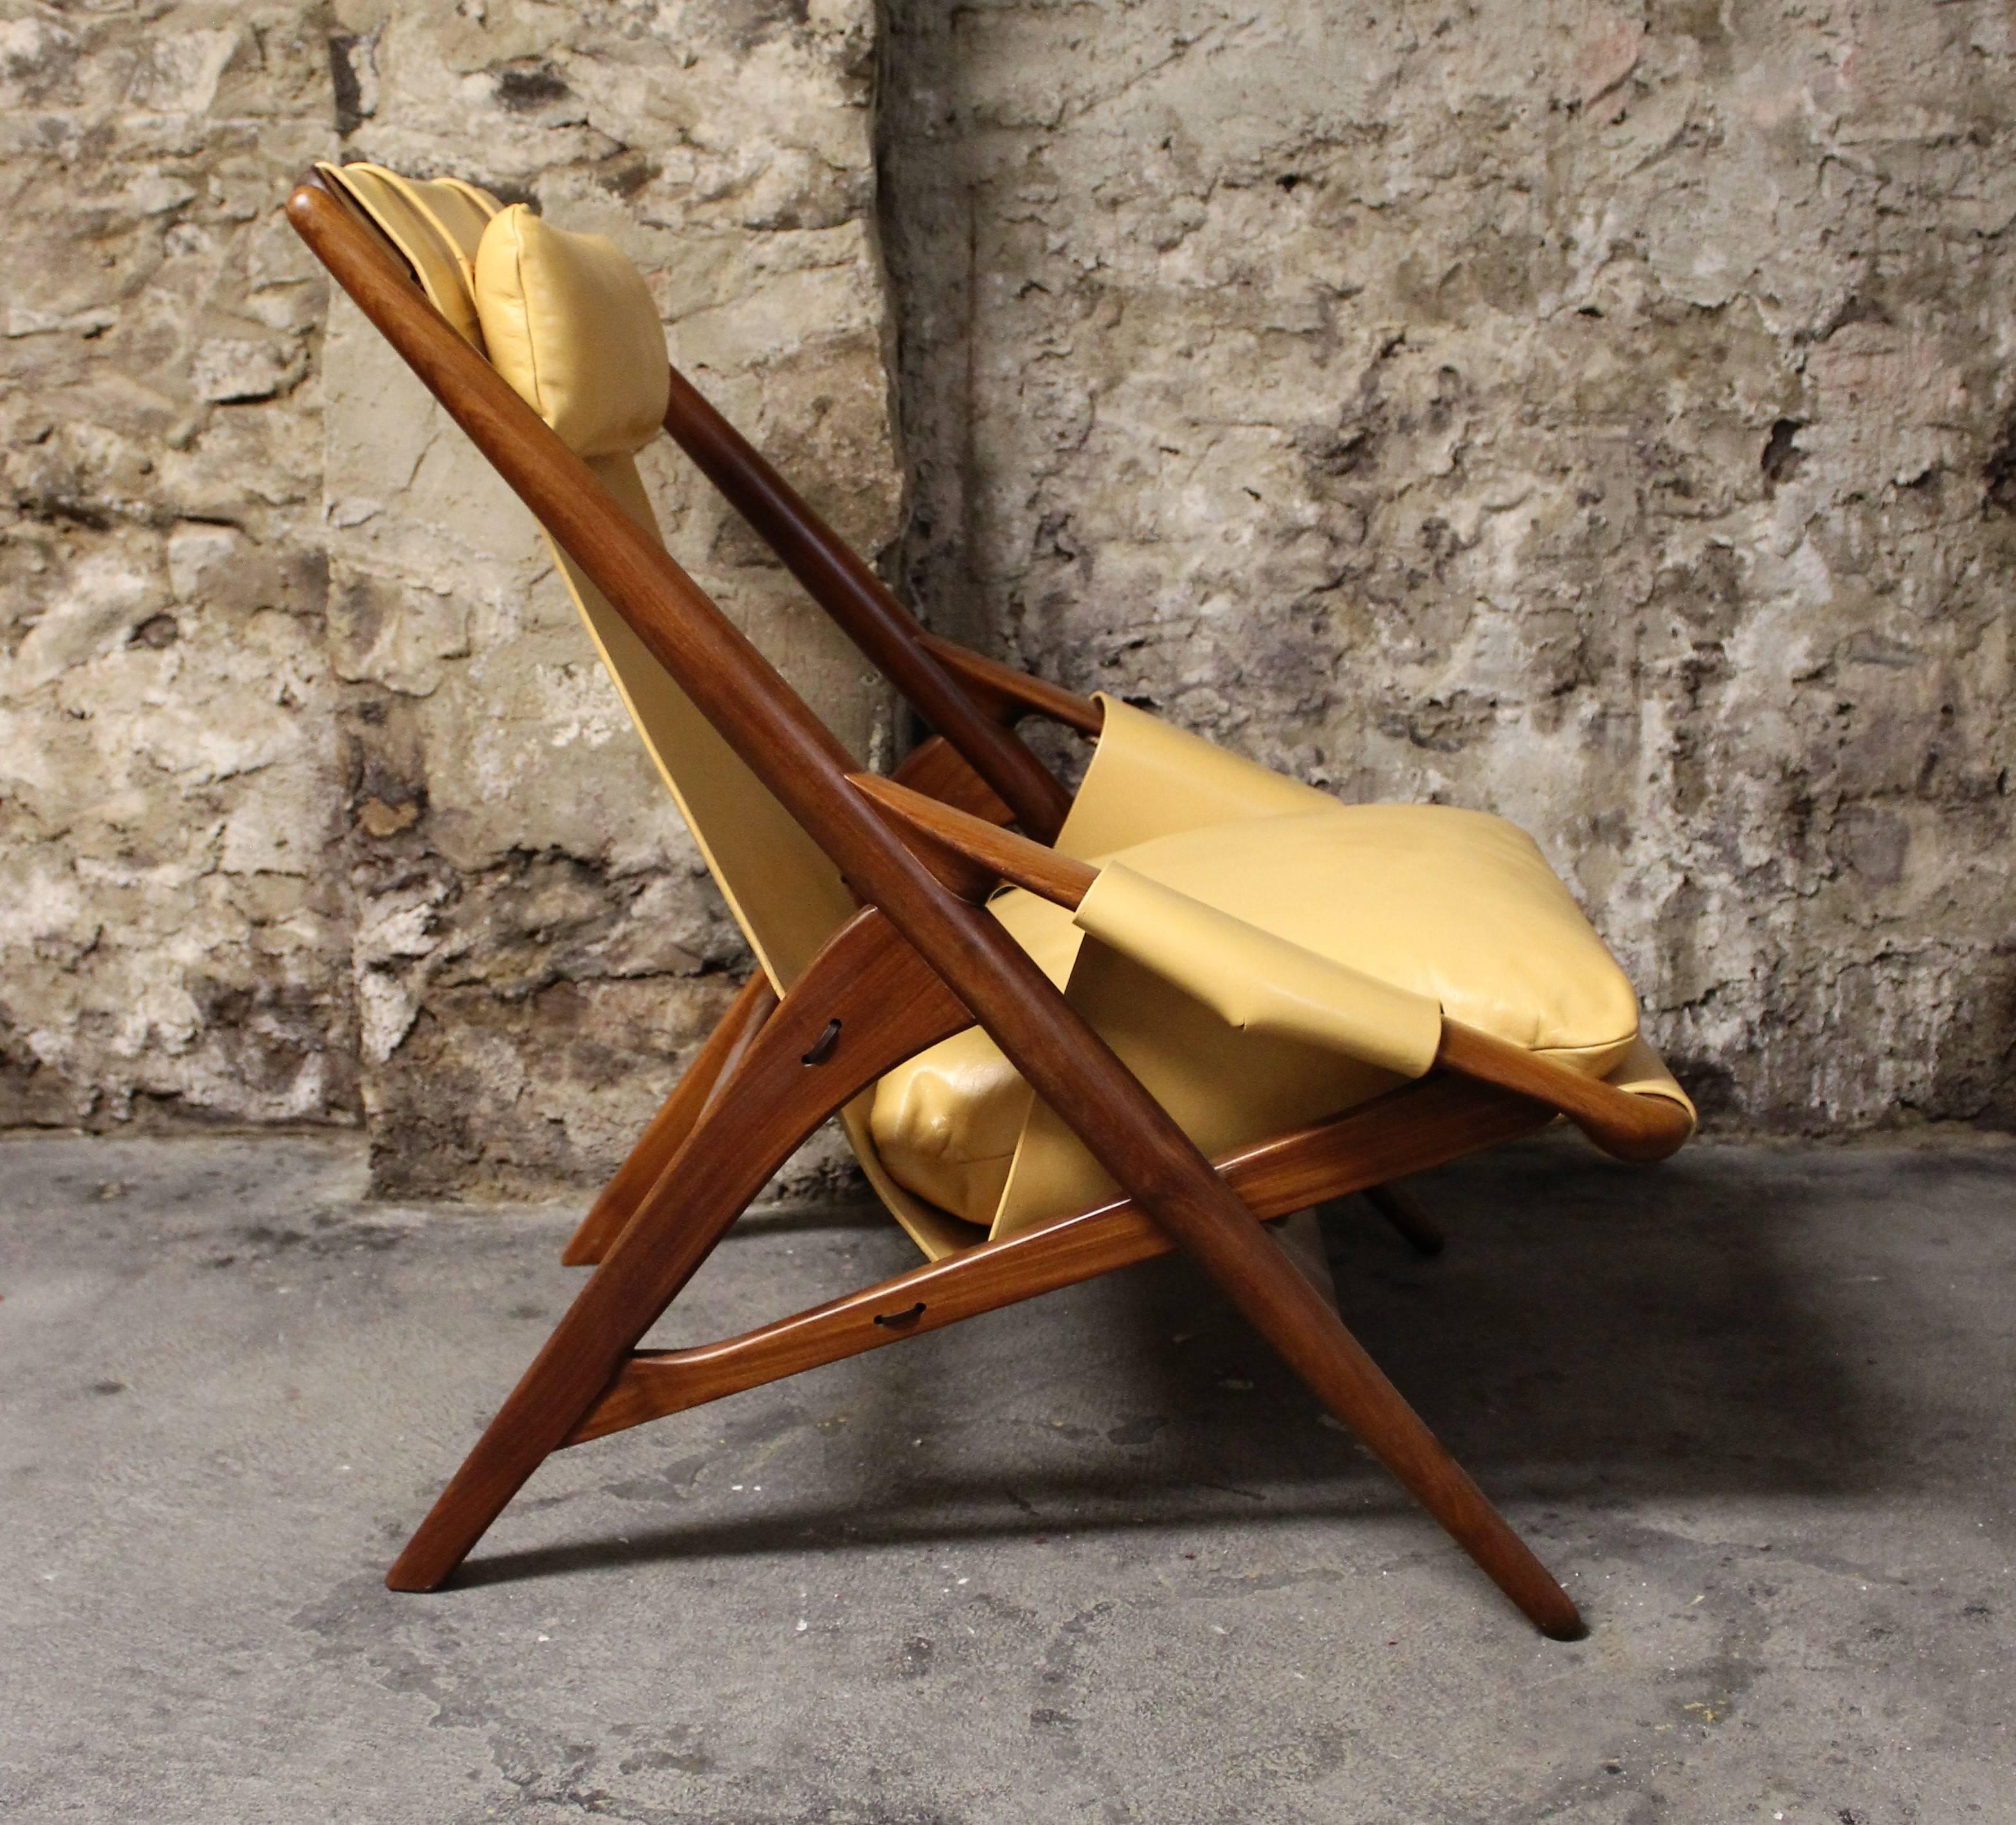 Gorgeous Mid-Century Modern sling chair by Italian designer W.D. Andersag. The frame is made of afromosia wood and features stunning grains and warm rich hues. The high quality Italian leather is original and has been completely restored and re-dyed.